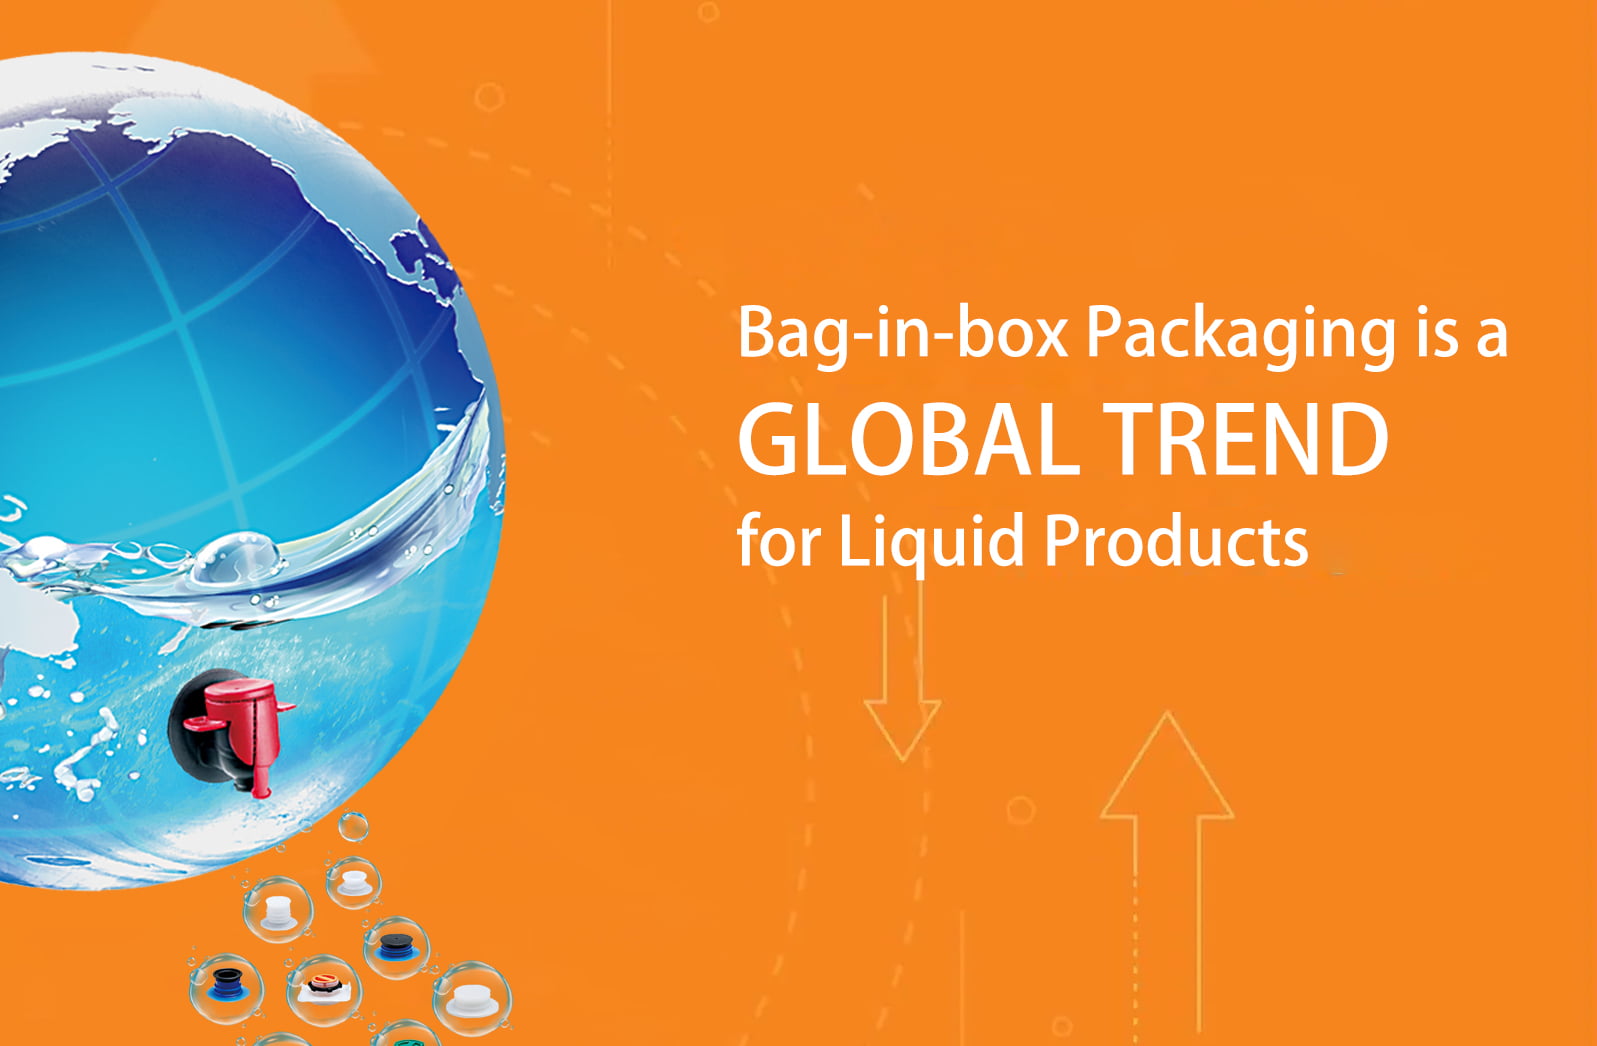 Bag-in-box Packaging is a Global Trend for Liquid Products